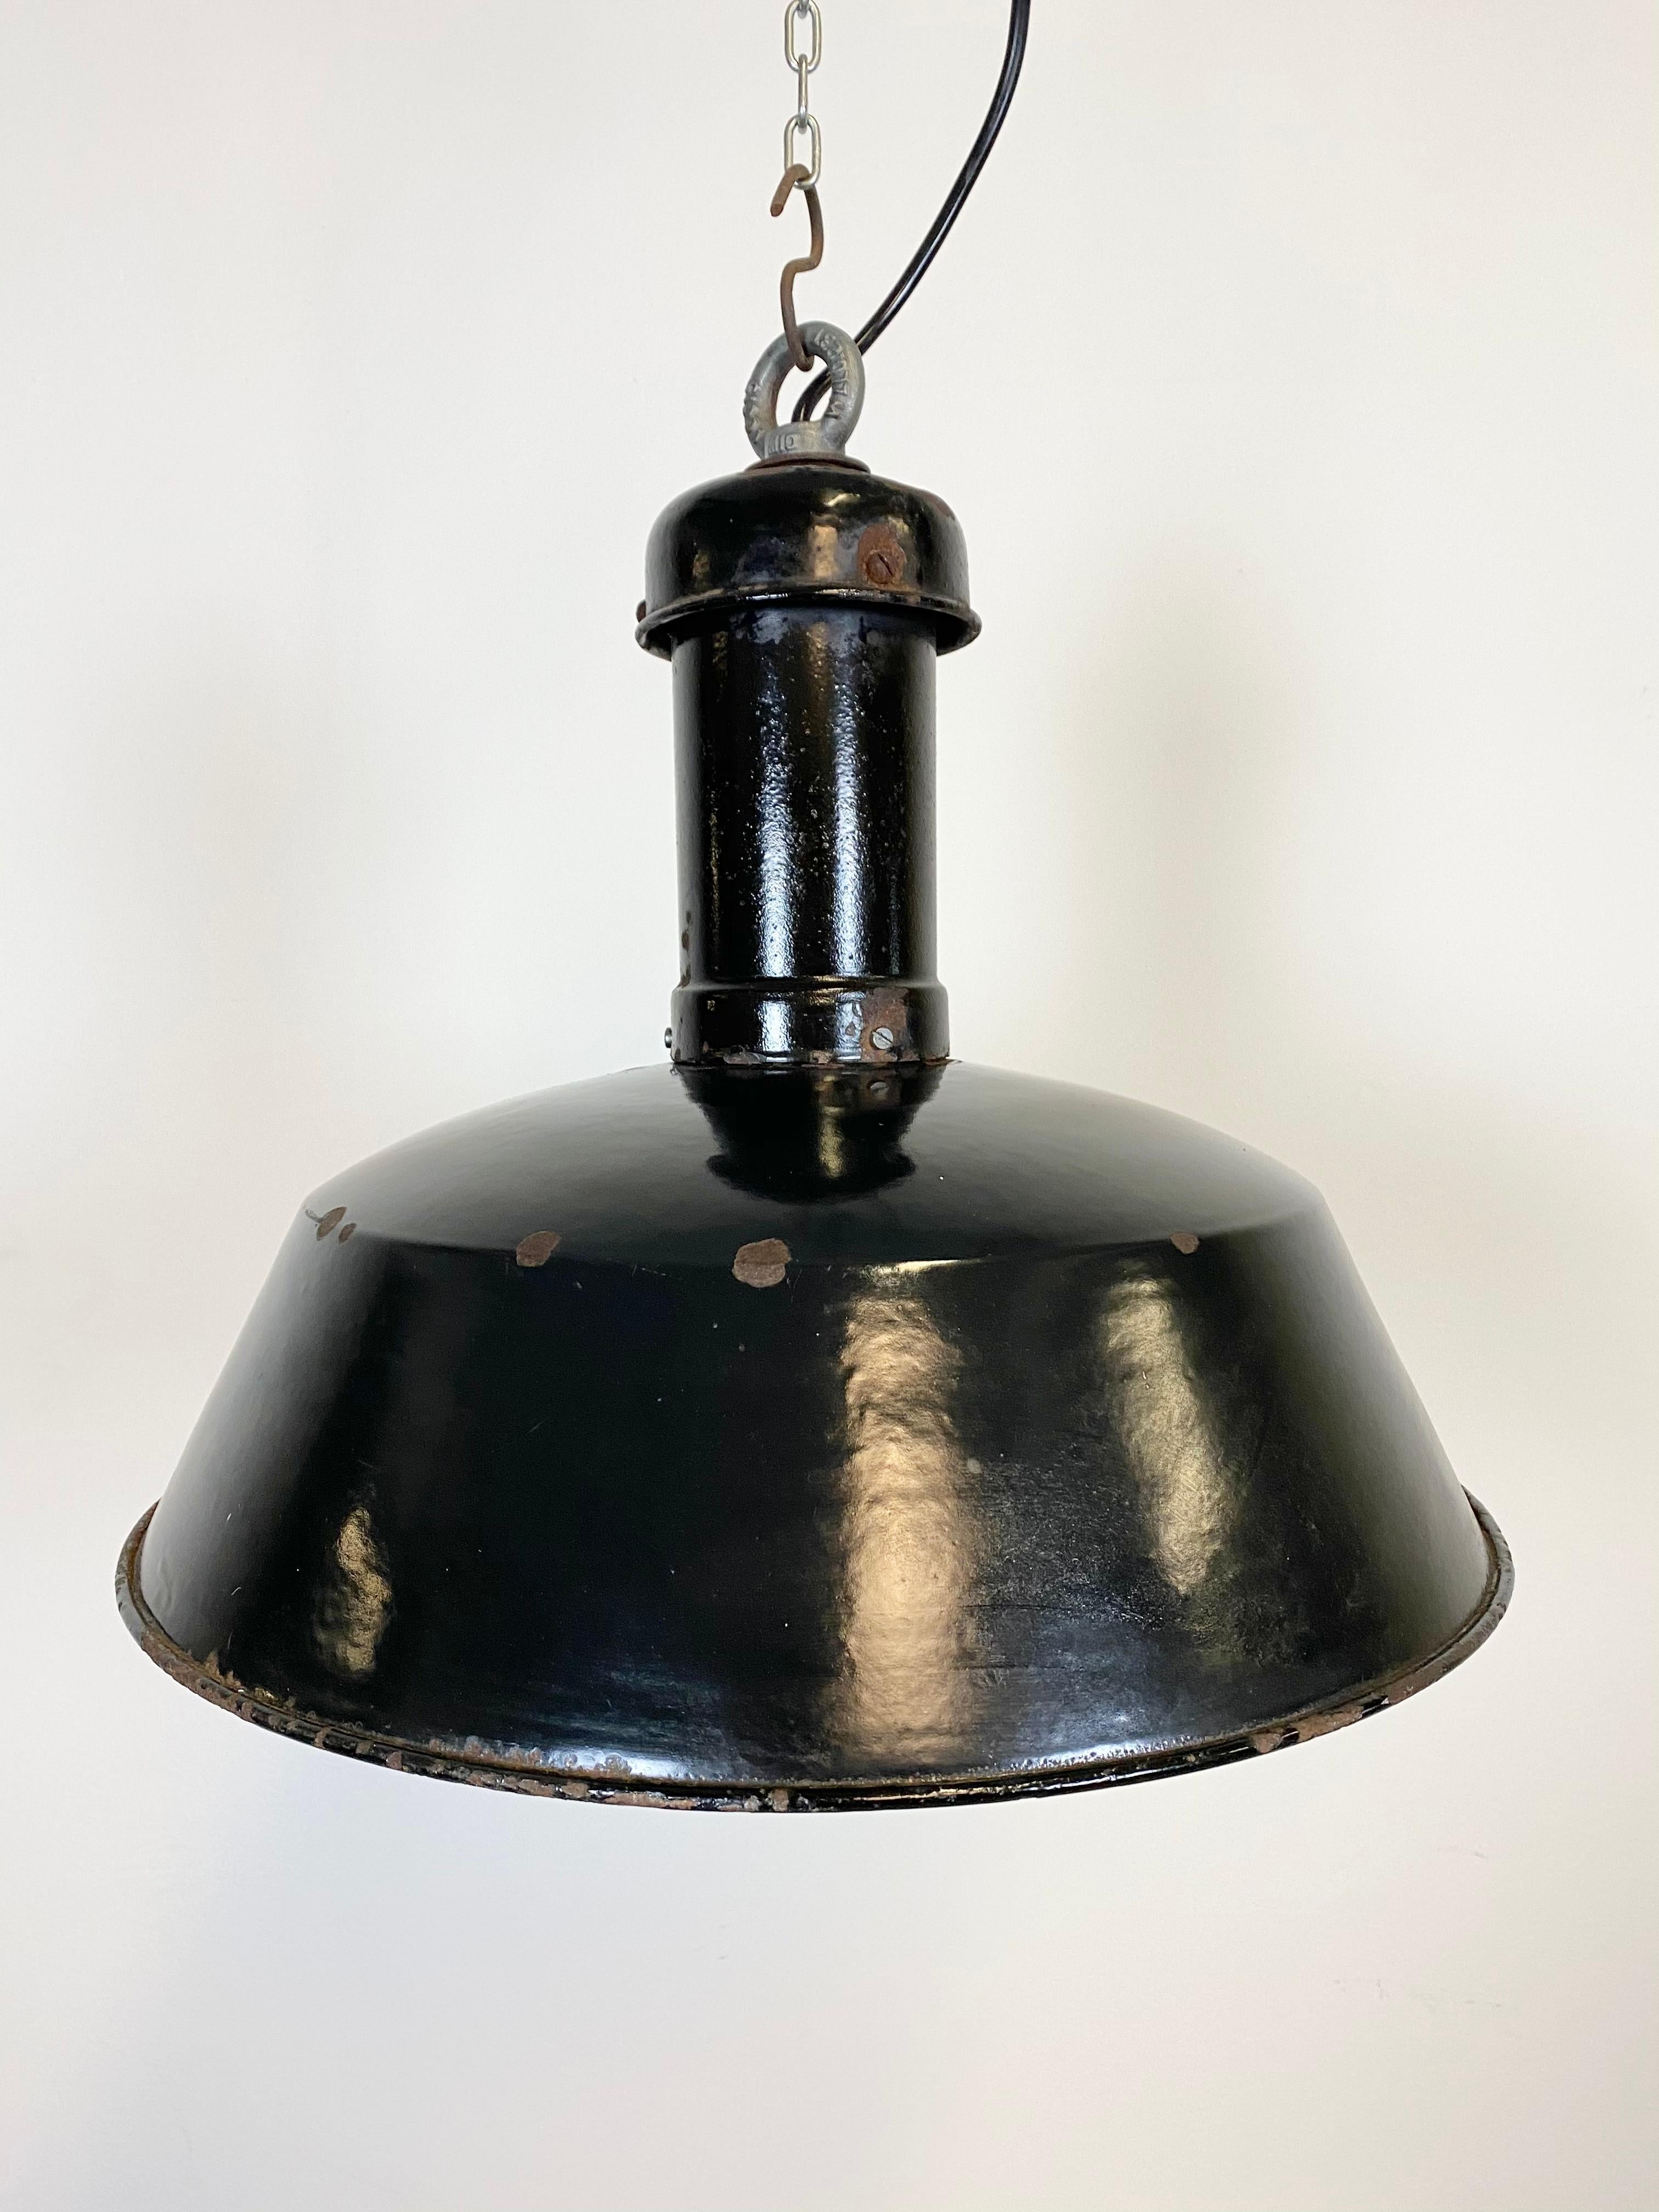 Pendant lamp from former Czechoslovakia, previously used in a factories. Made from enamelled metal. Black outside, white interior. Iron top. New porcelain socket for E 27 lightbulbs and wire. Measure: Diameter 41 cm. Weight: 3 kg.